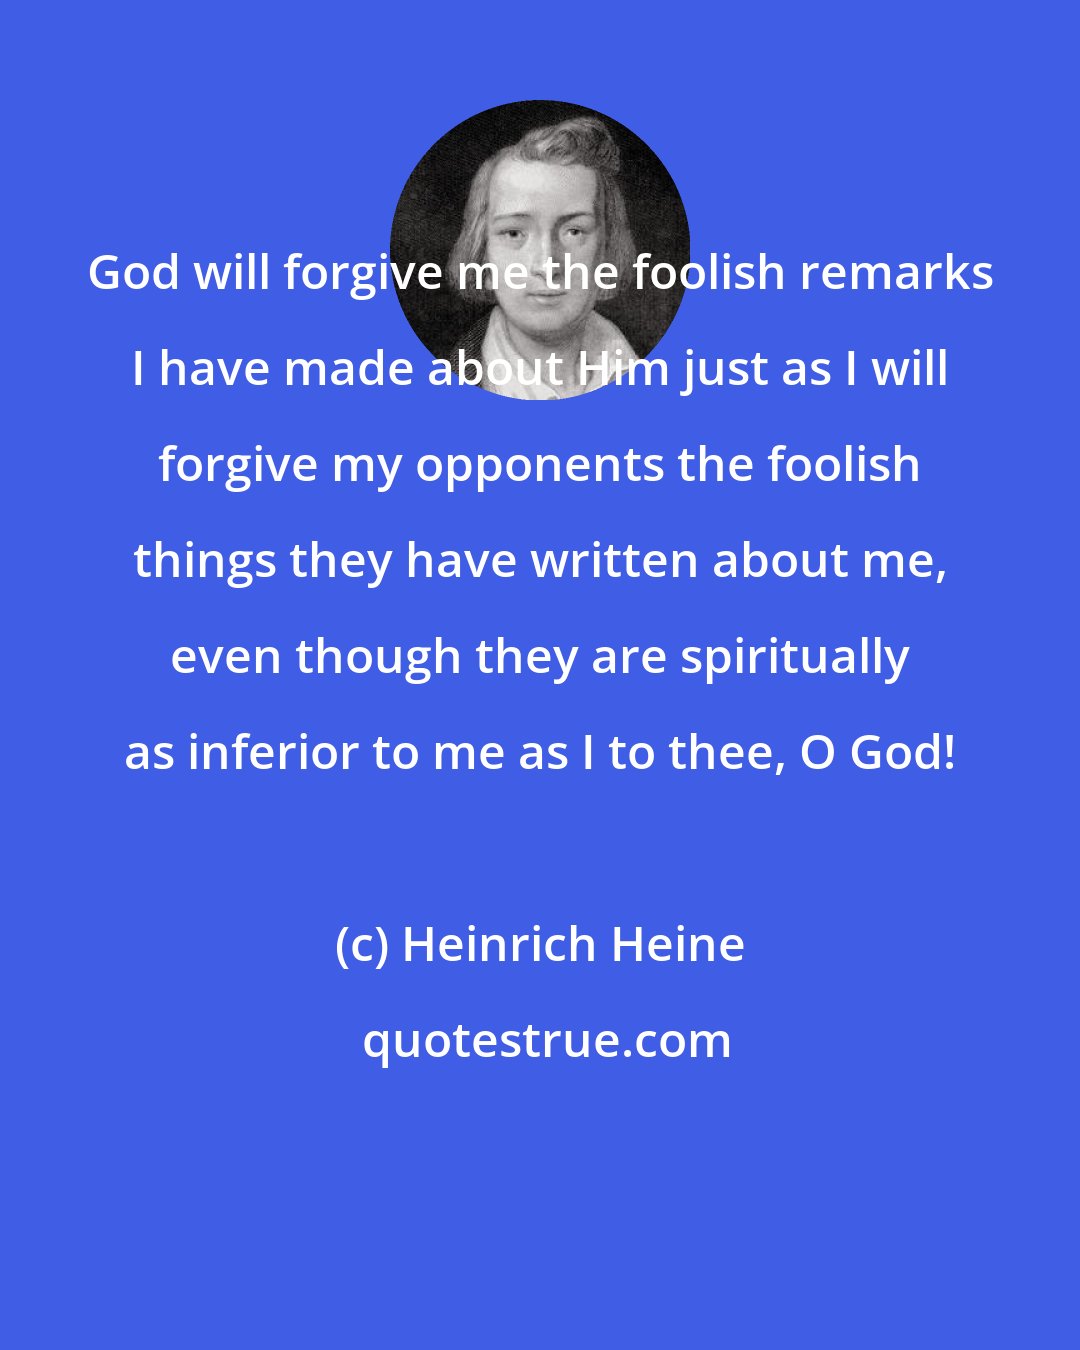 Heinrich Heine: God will forgive me the foolish remarks I have made about Him just as I will forgive my opponents the foolish things they have written about me, even though they are spiritually as inferior to me as I to thee, O God!